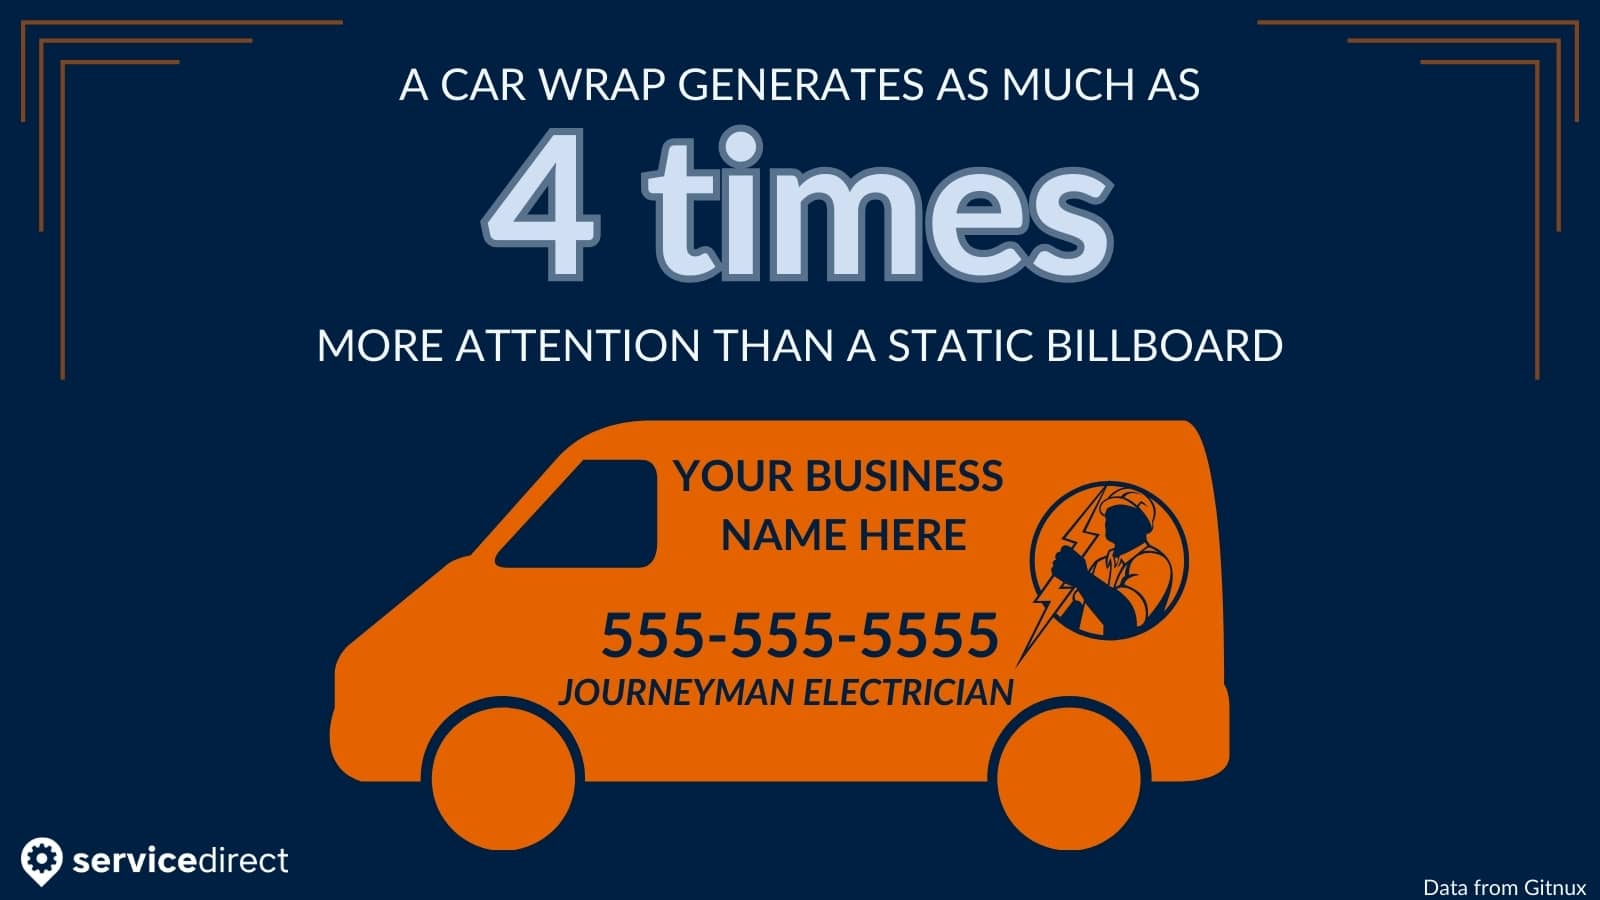 A car wrap can generate 4 times more attention than a static billboard